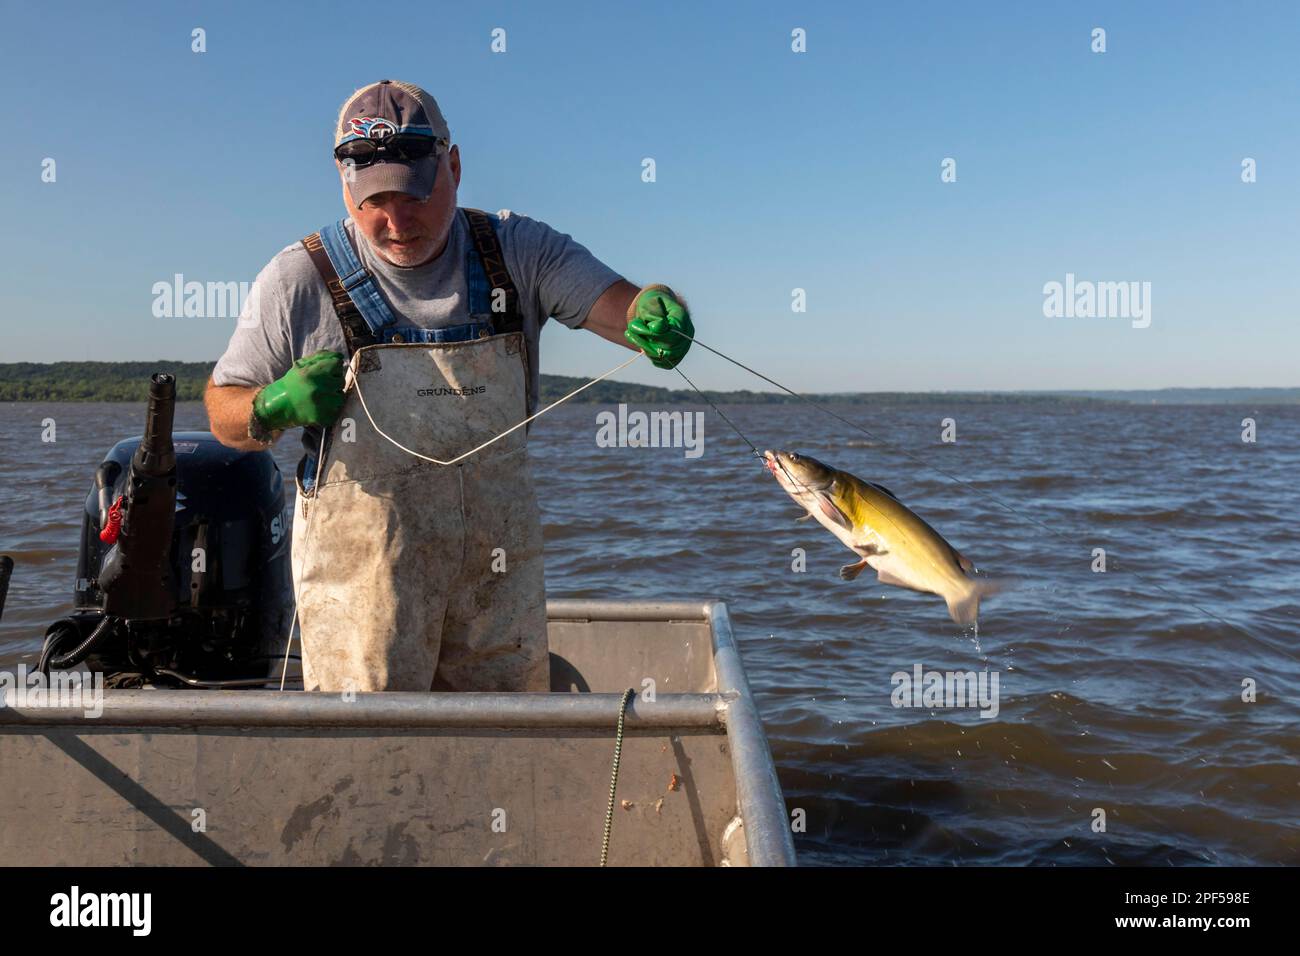 Peoria, Illinois, Dave Buchanan fishes for catfish on the Illinois River.  He uses a trotline--a long line from which a hundred or more baited hooks  Stock Photo - Alamy